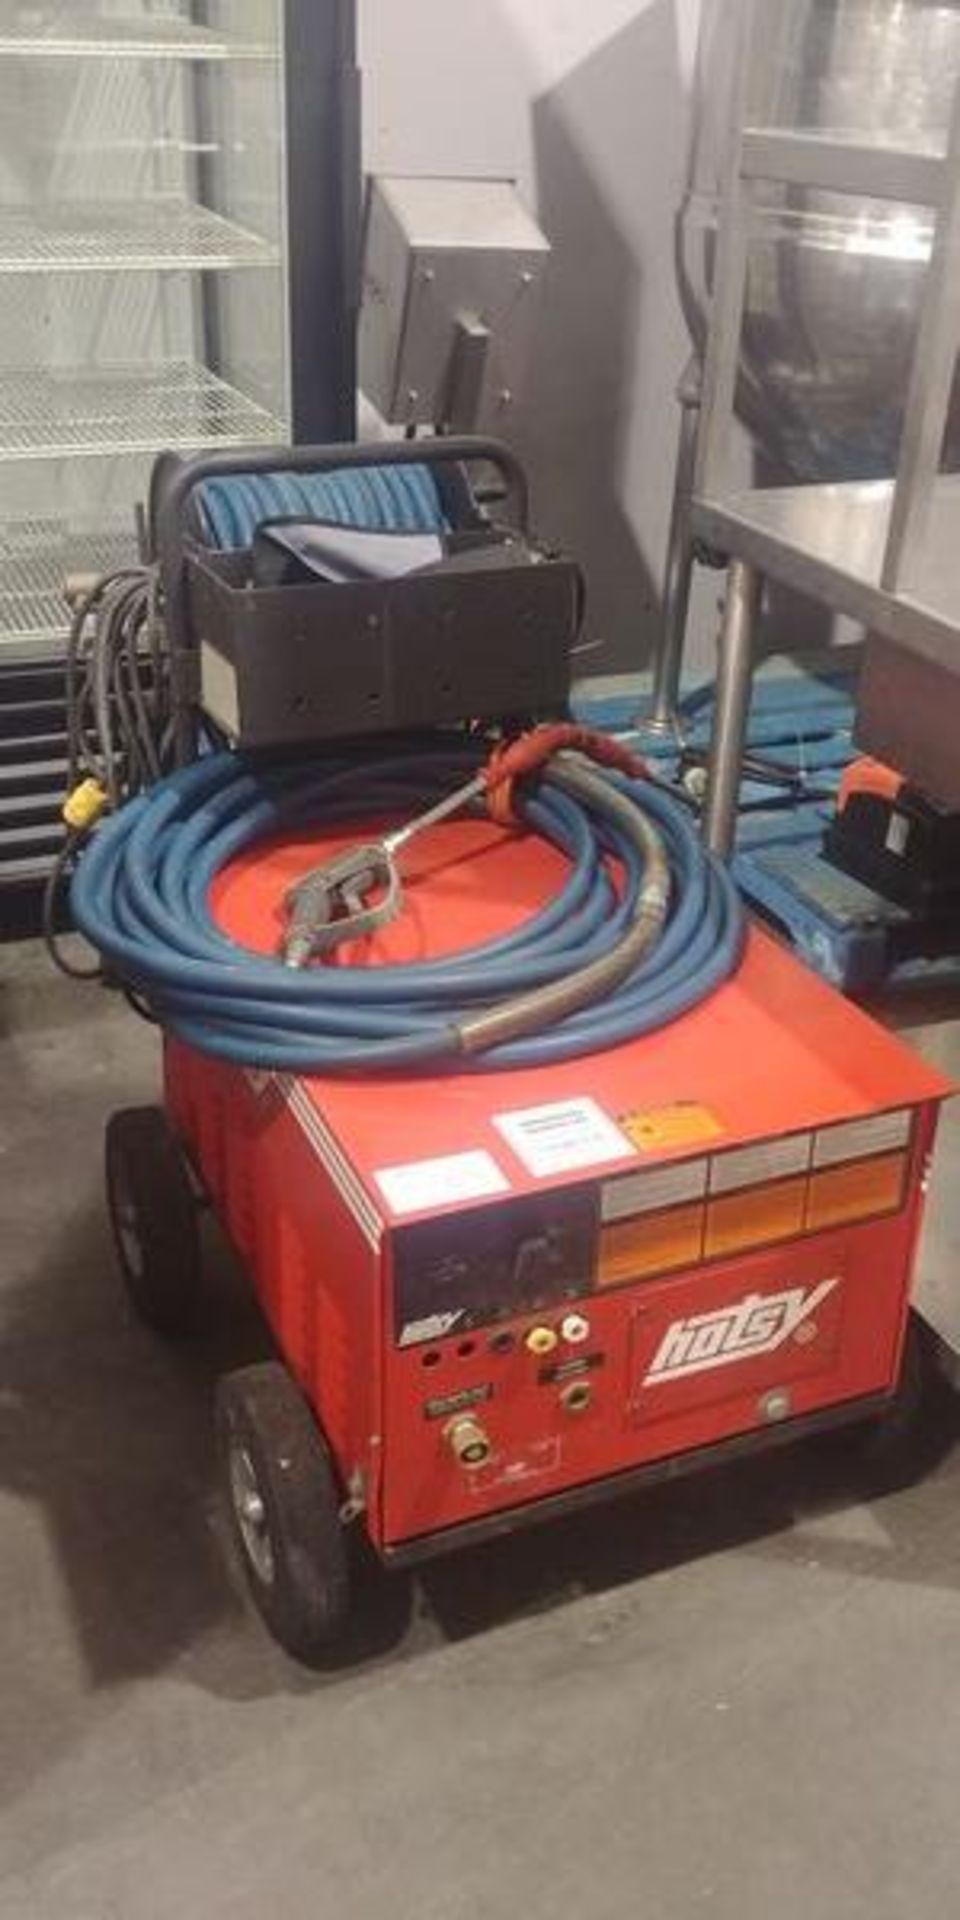 Hotsy Pressure Washer With Hoses